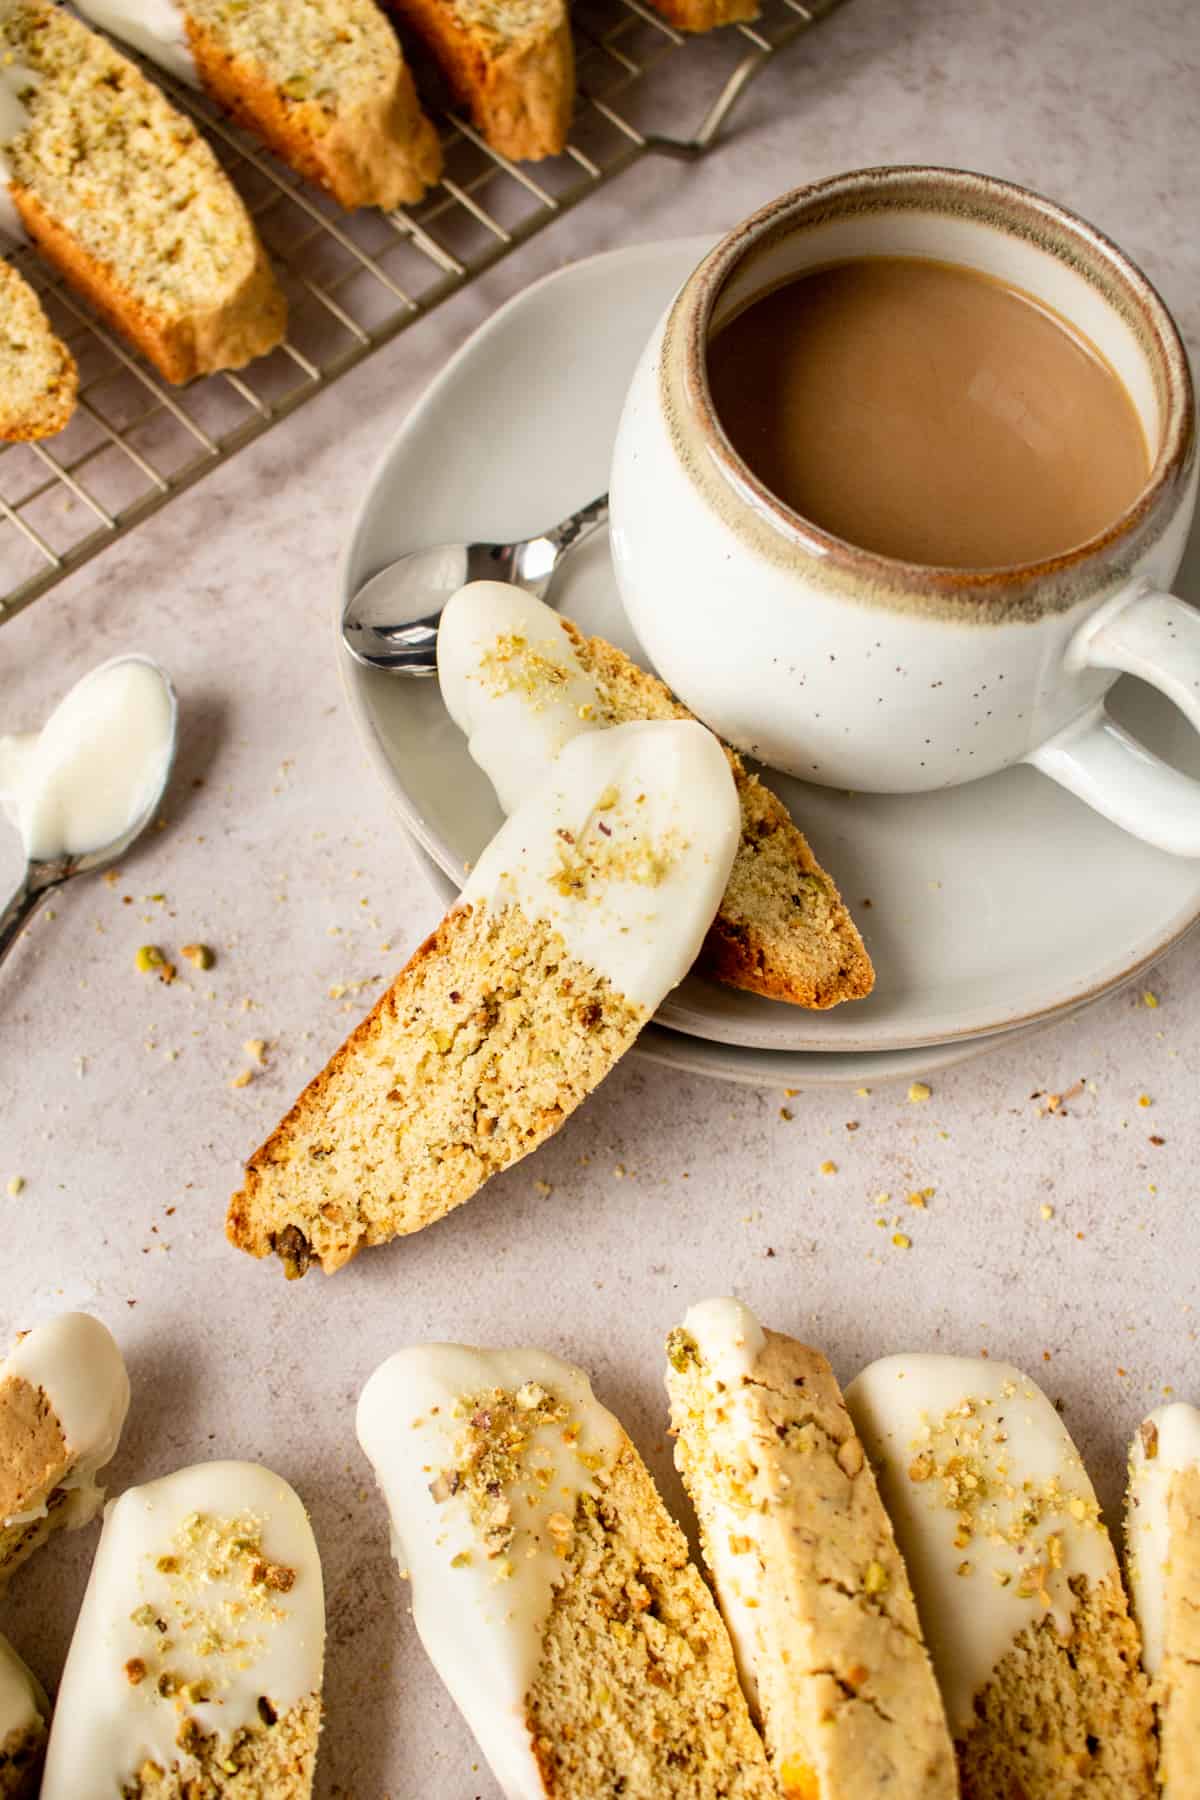 lemon biscotti ready to eat with coffee